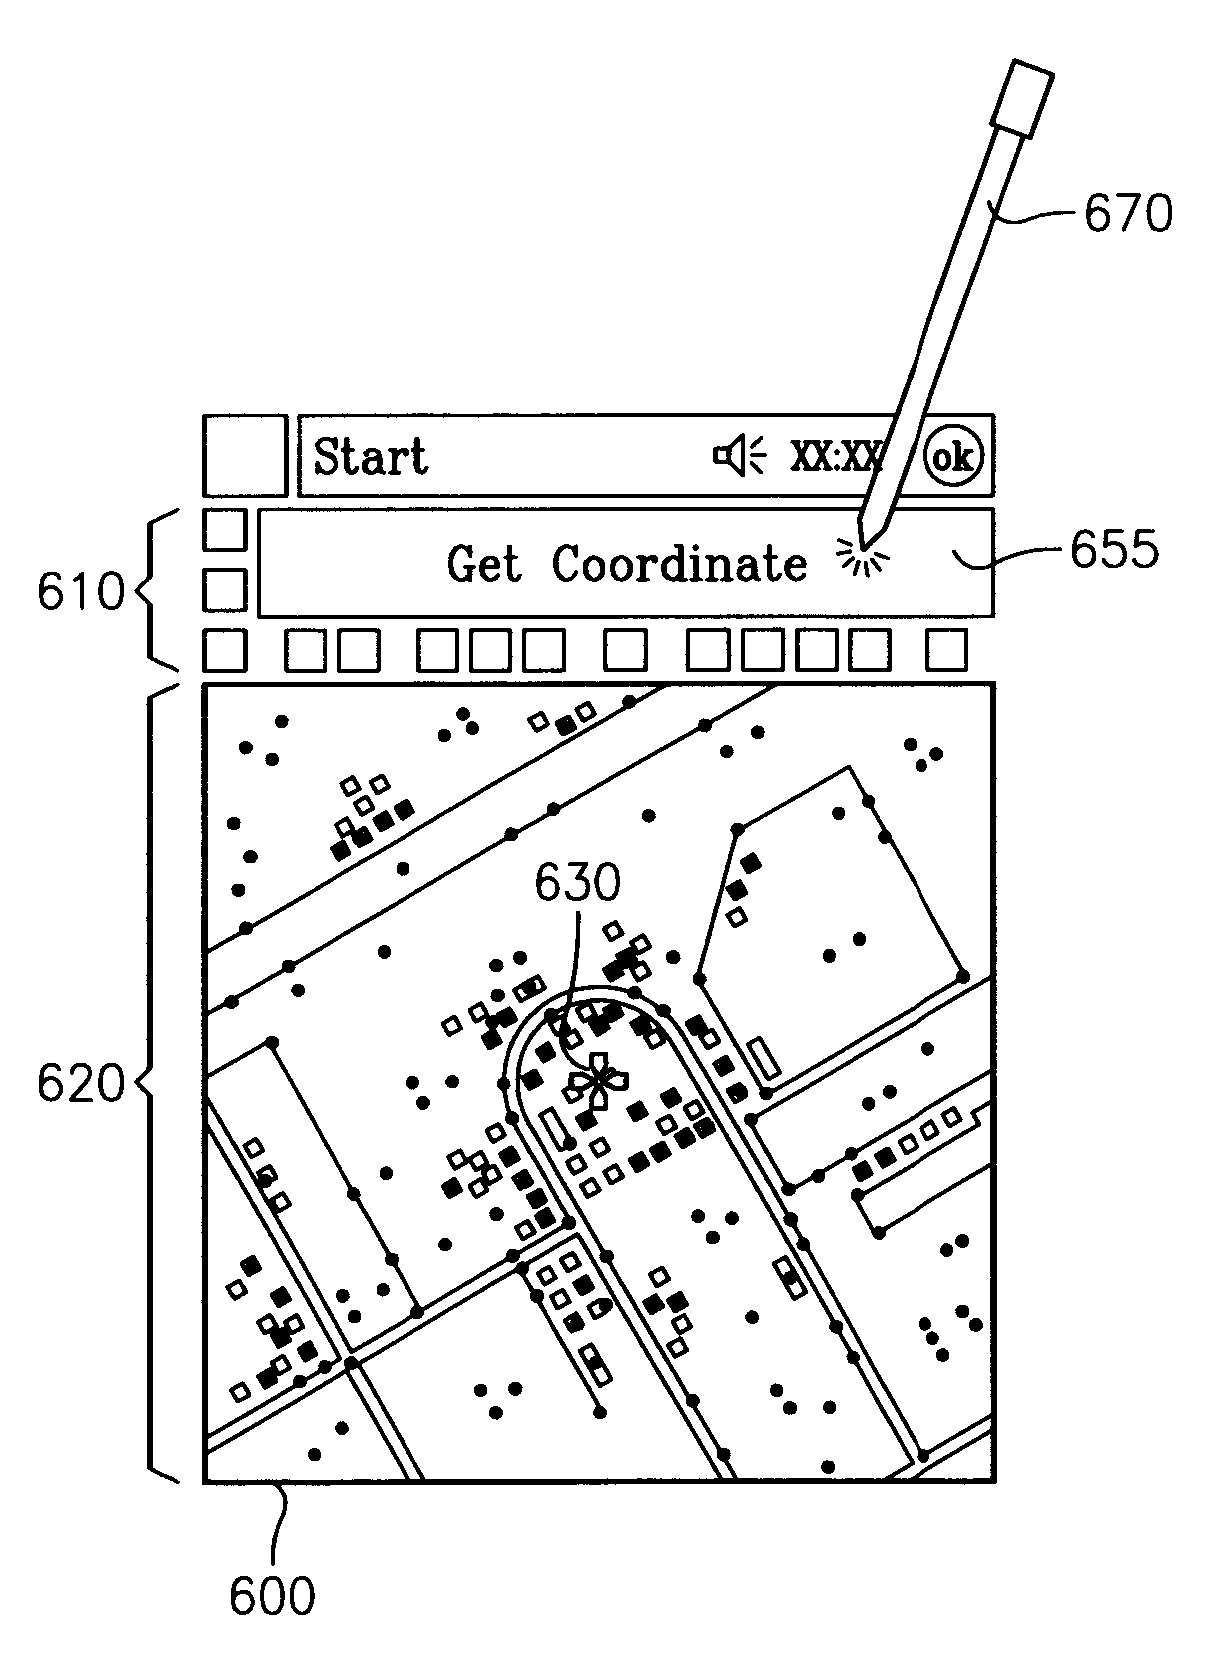 Method and apparatus for generating a precision fires image using a handheld device for image based coordinate determination